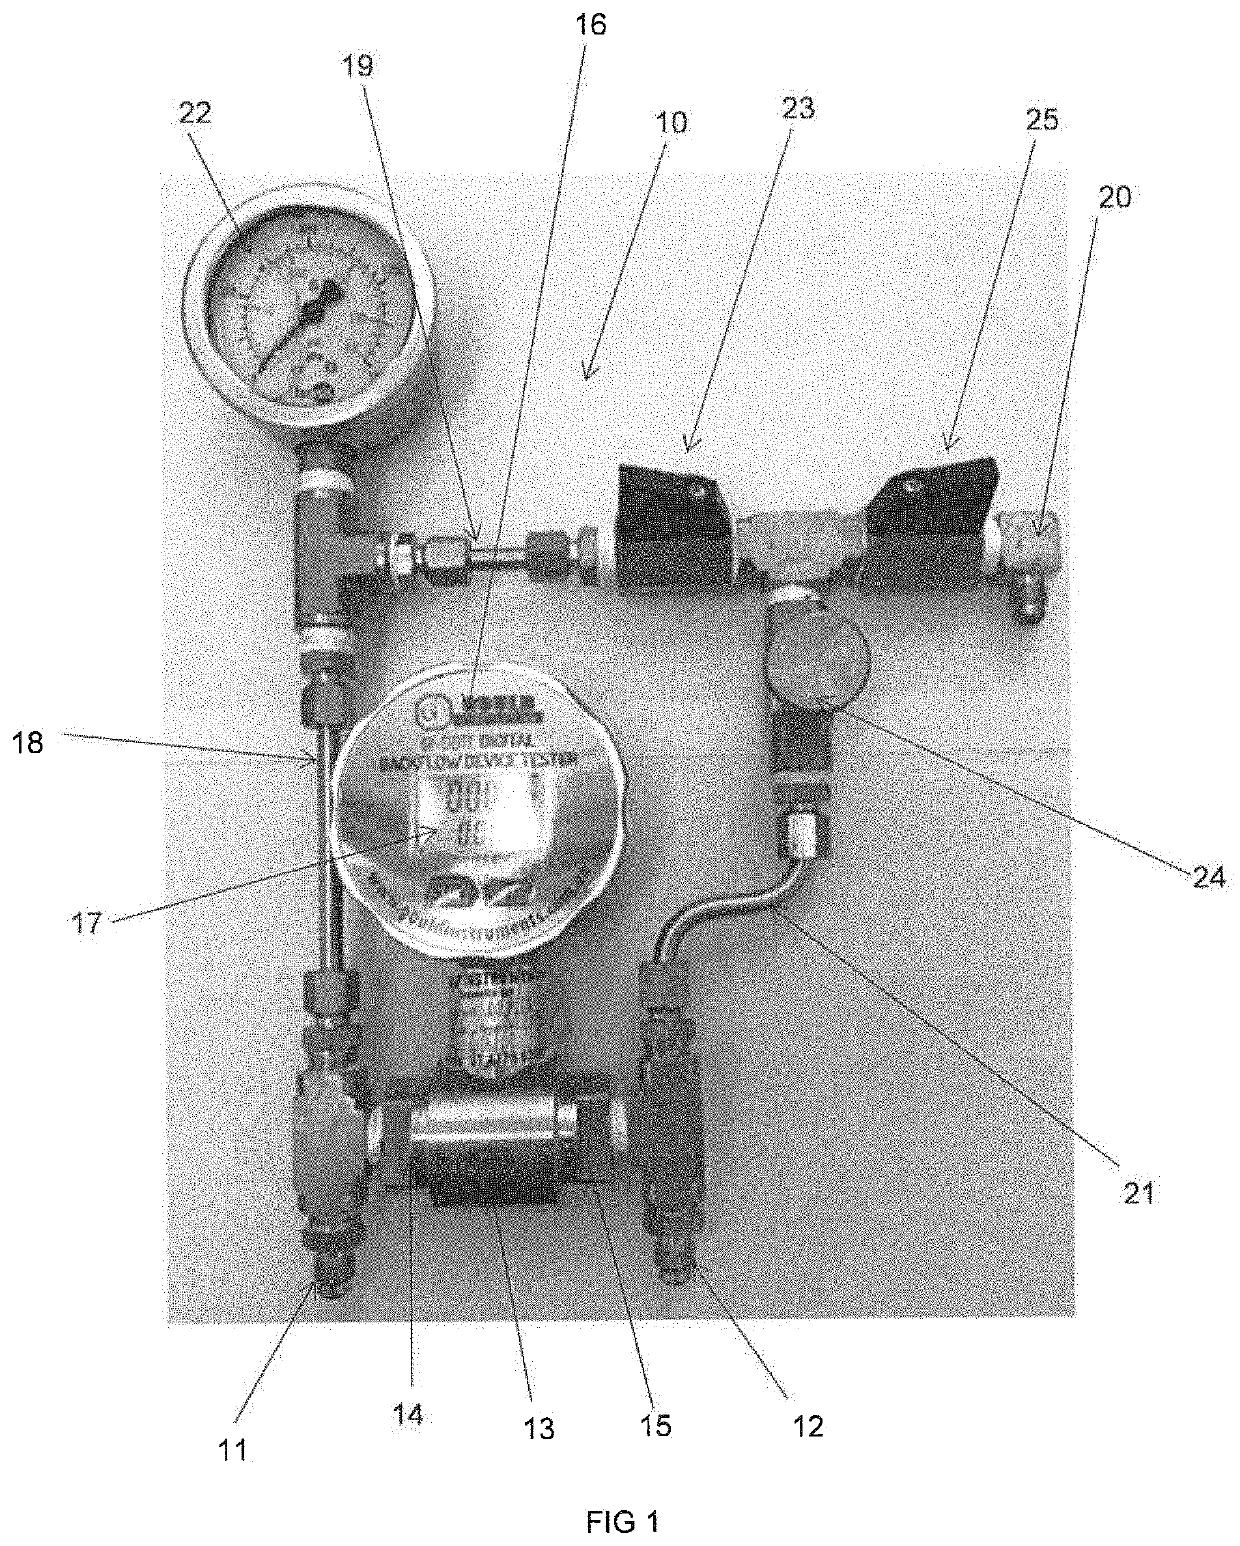 A testing device for backflow prevention devices